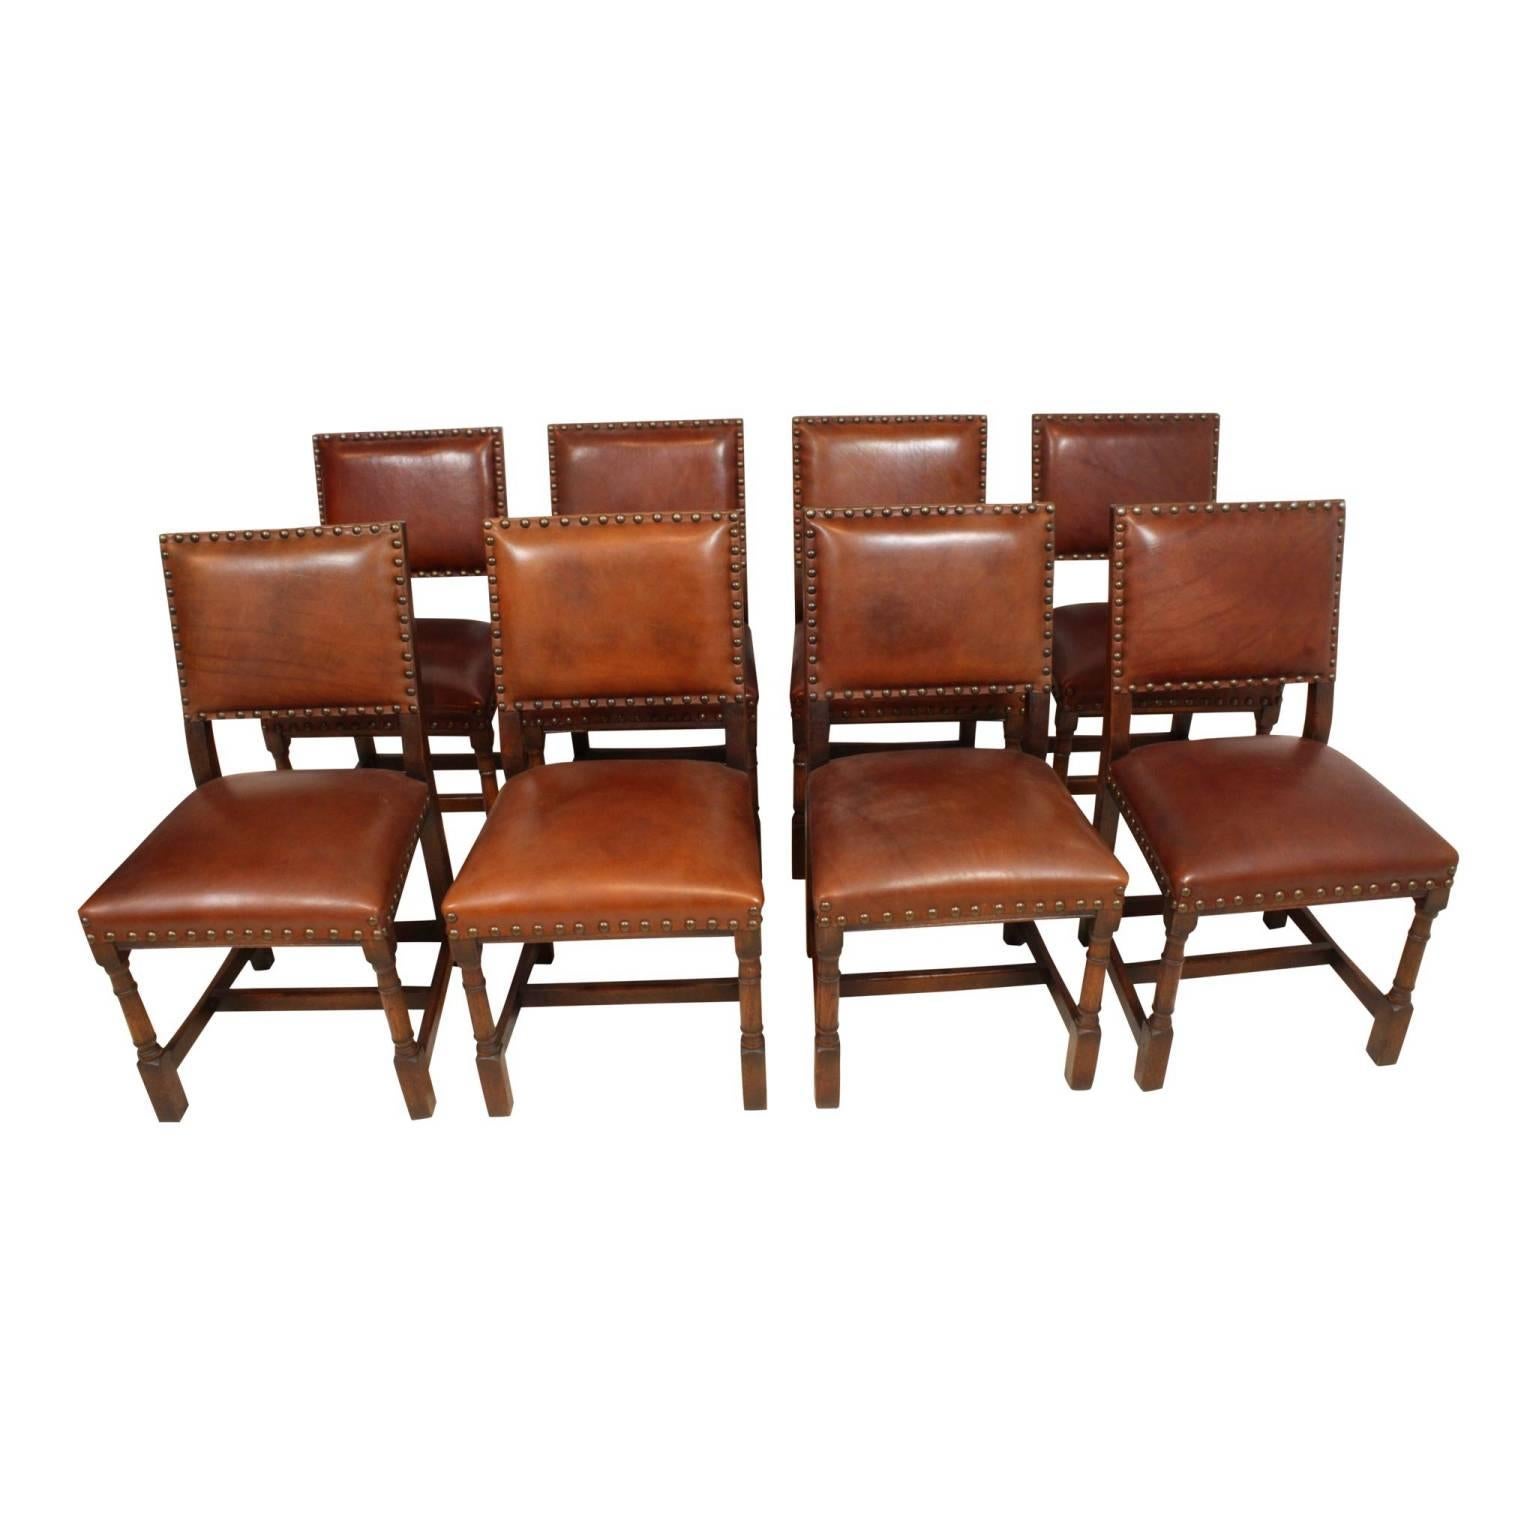 Mid-20th Century Oak Dining Room Table with Eight Leather Chairs 2